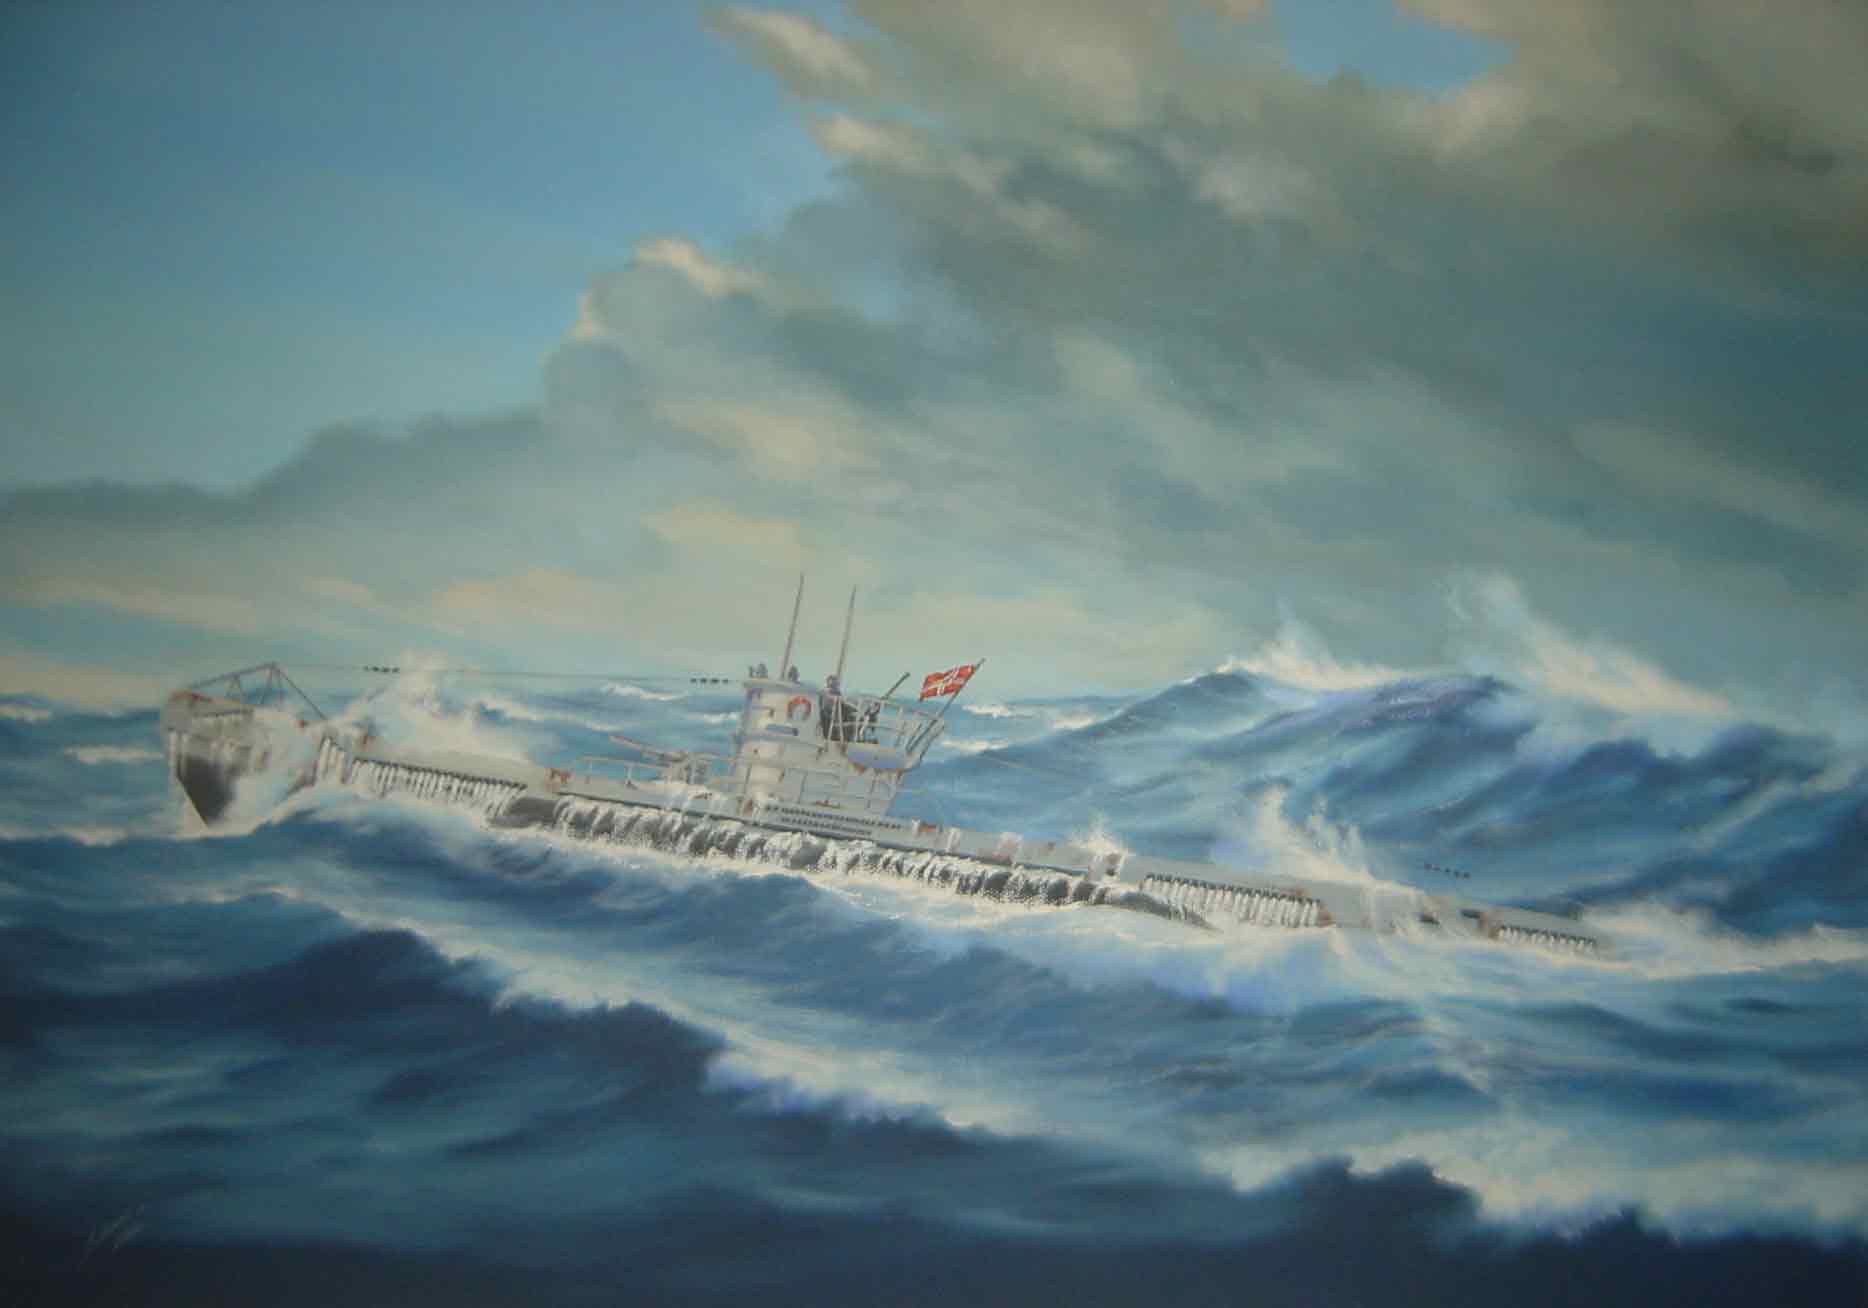 U-Boat_in_Bad_weather